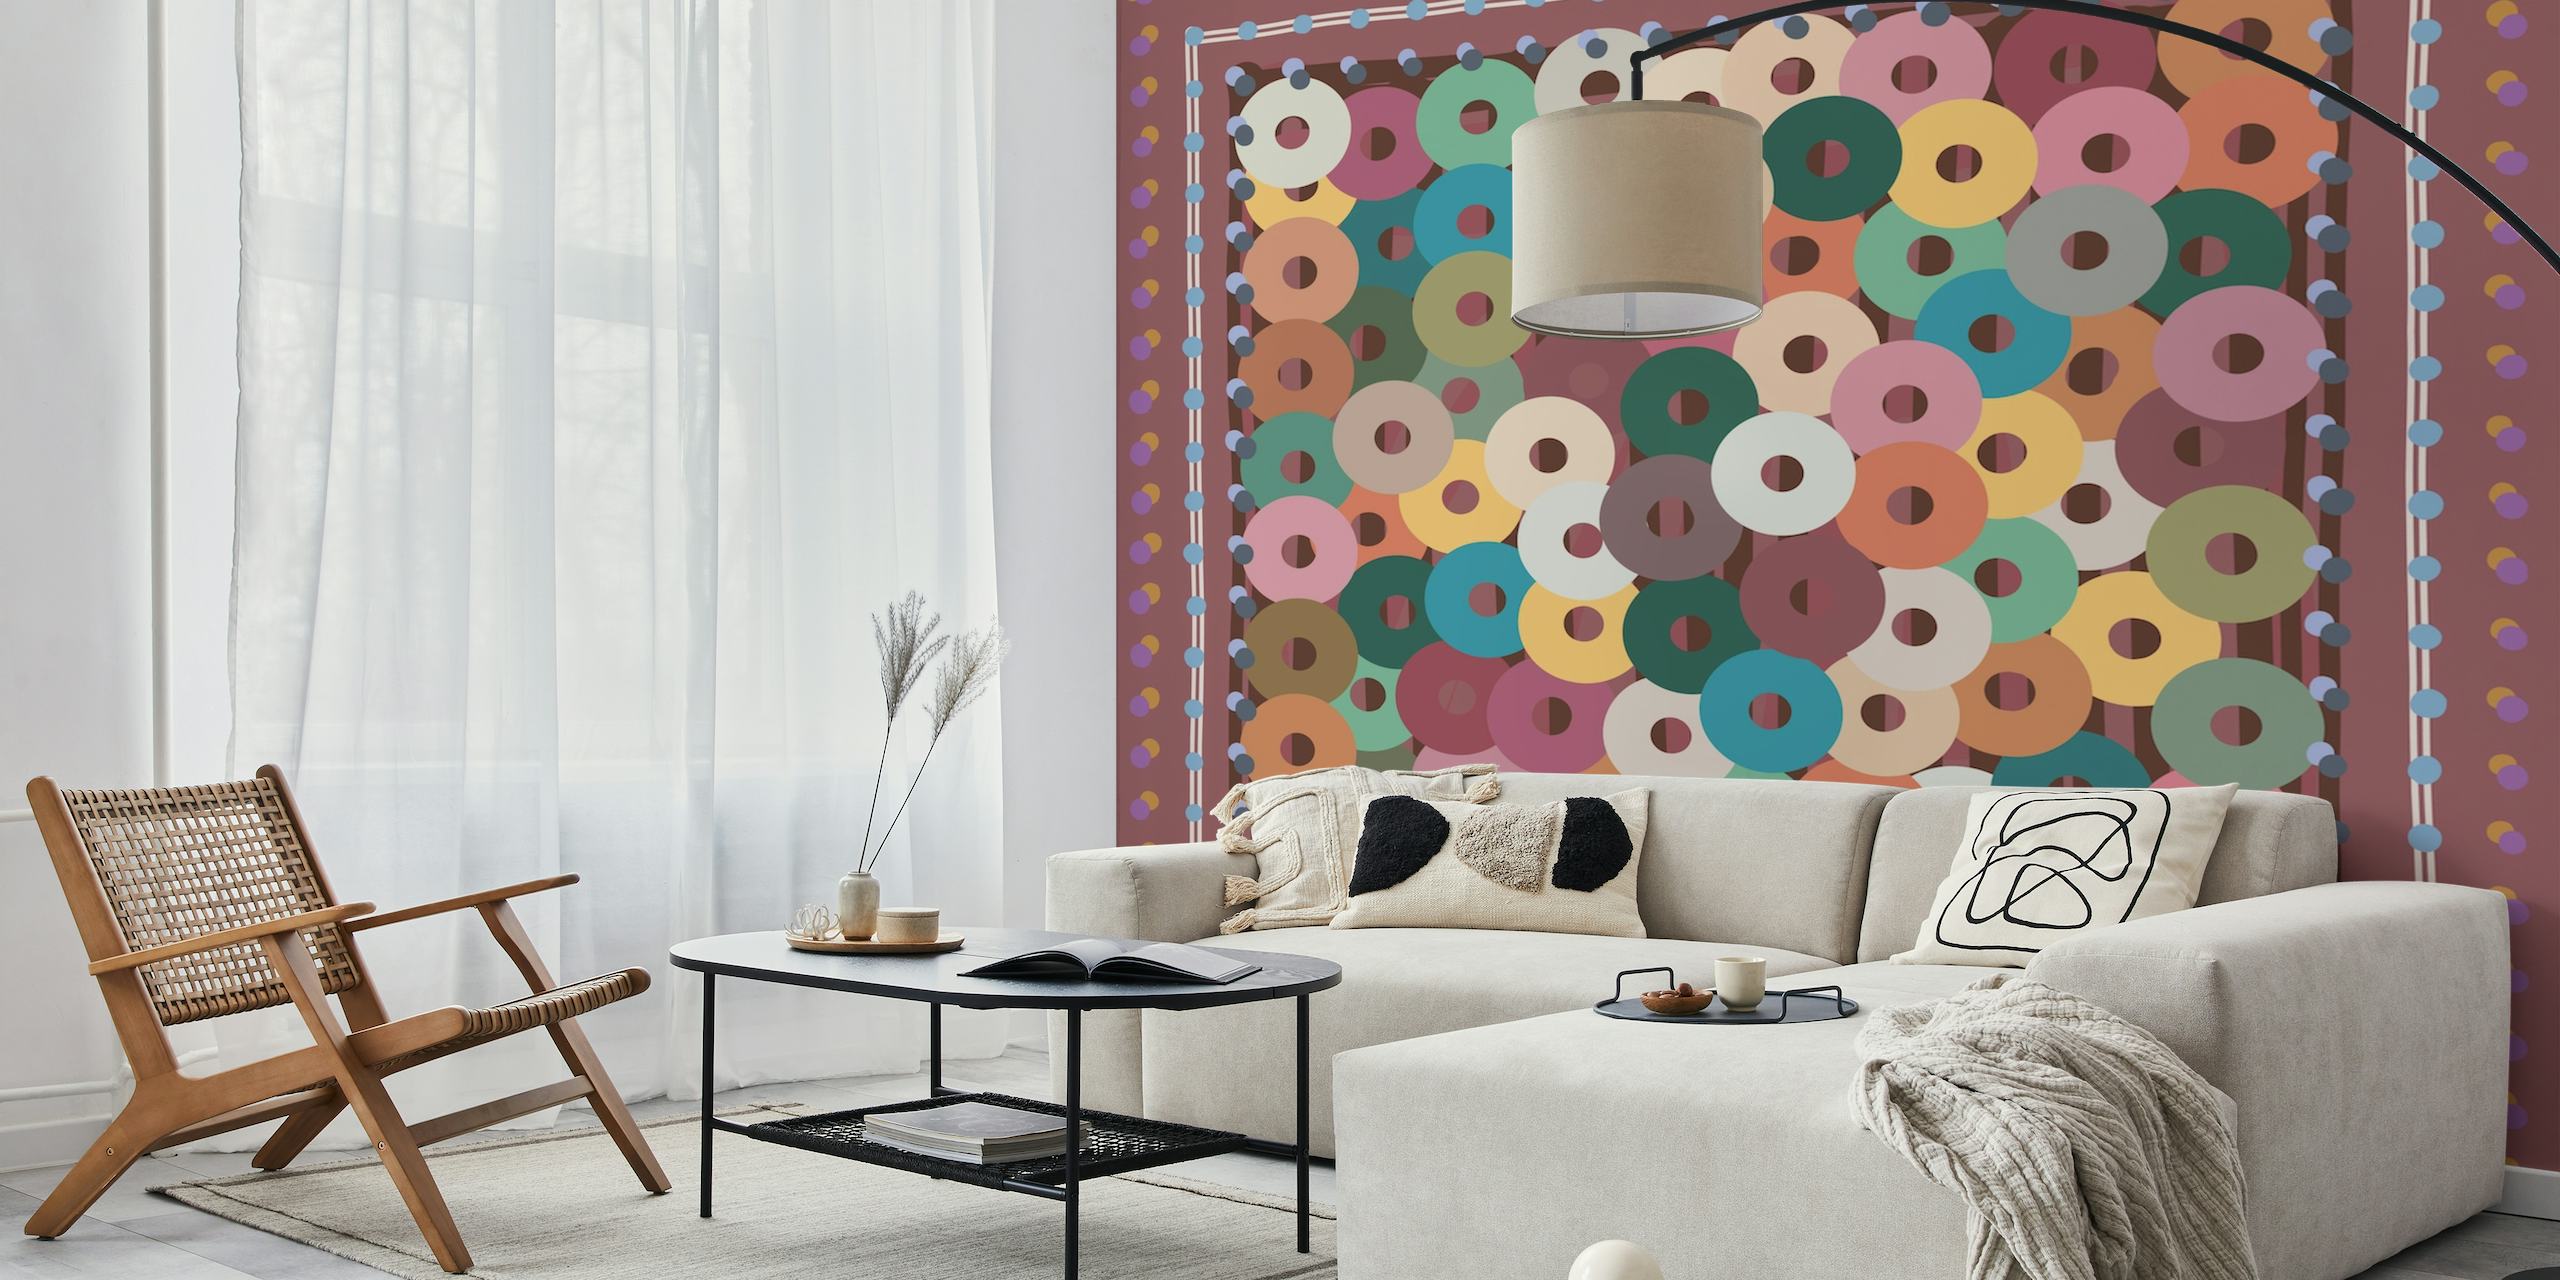 Colorful circle pattern wall mural with nature-inspired tones